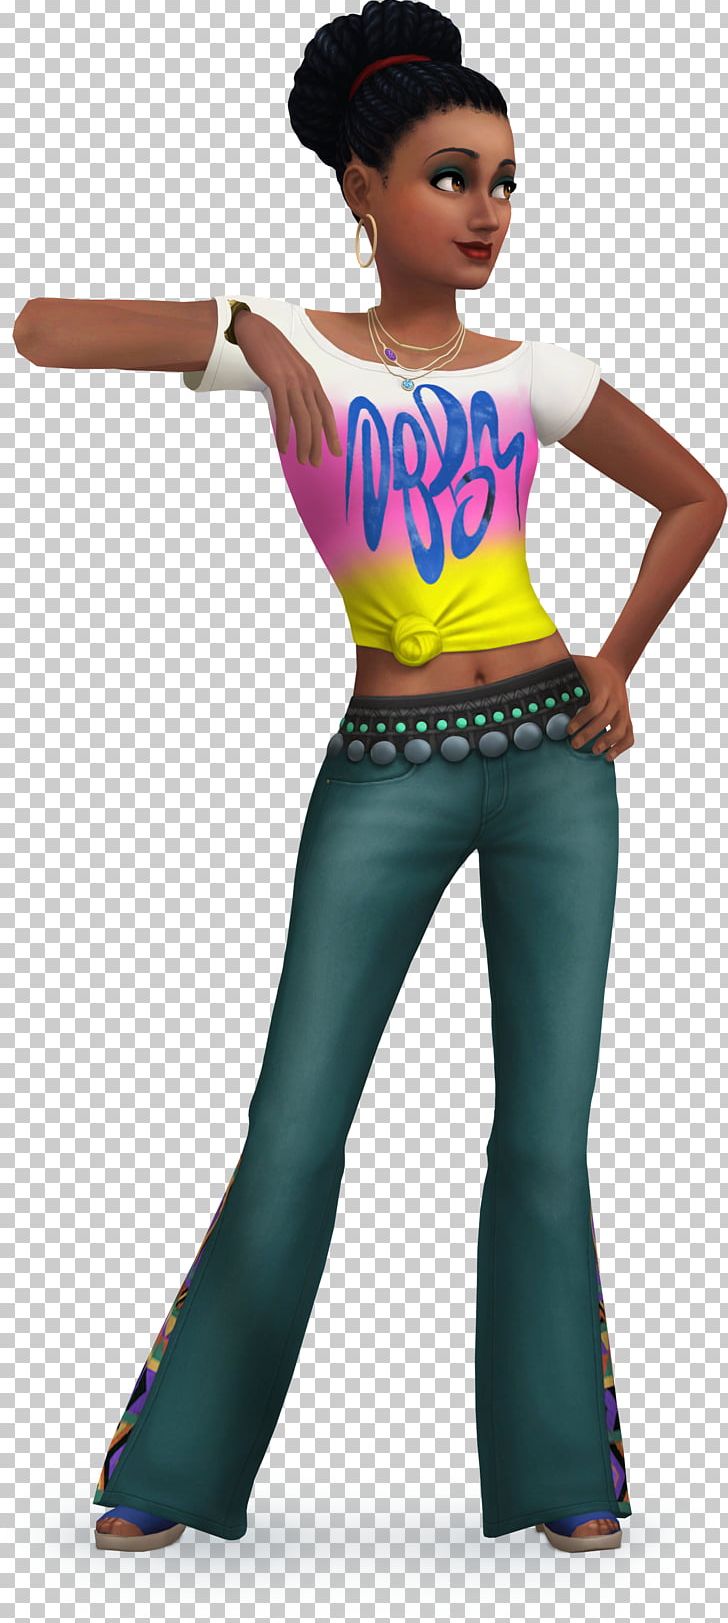 The Sims Mobile The Sims 4 The Sims 3 Grand Theft Auto V PNG, Clipart, Abdomen, Arm, Cheating In Video Games, Clothing, Costume Free PNG Download